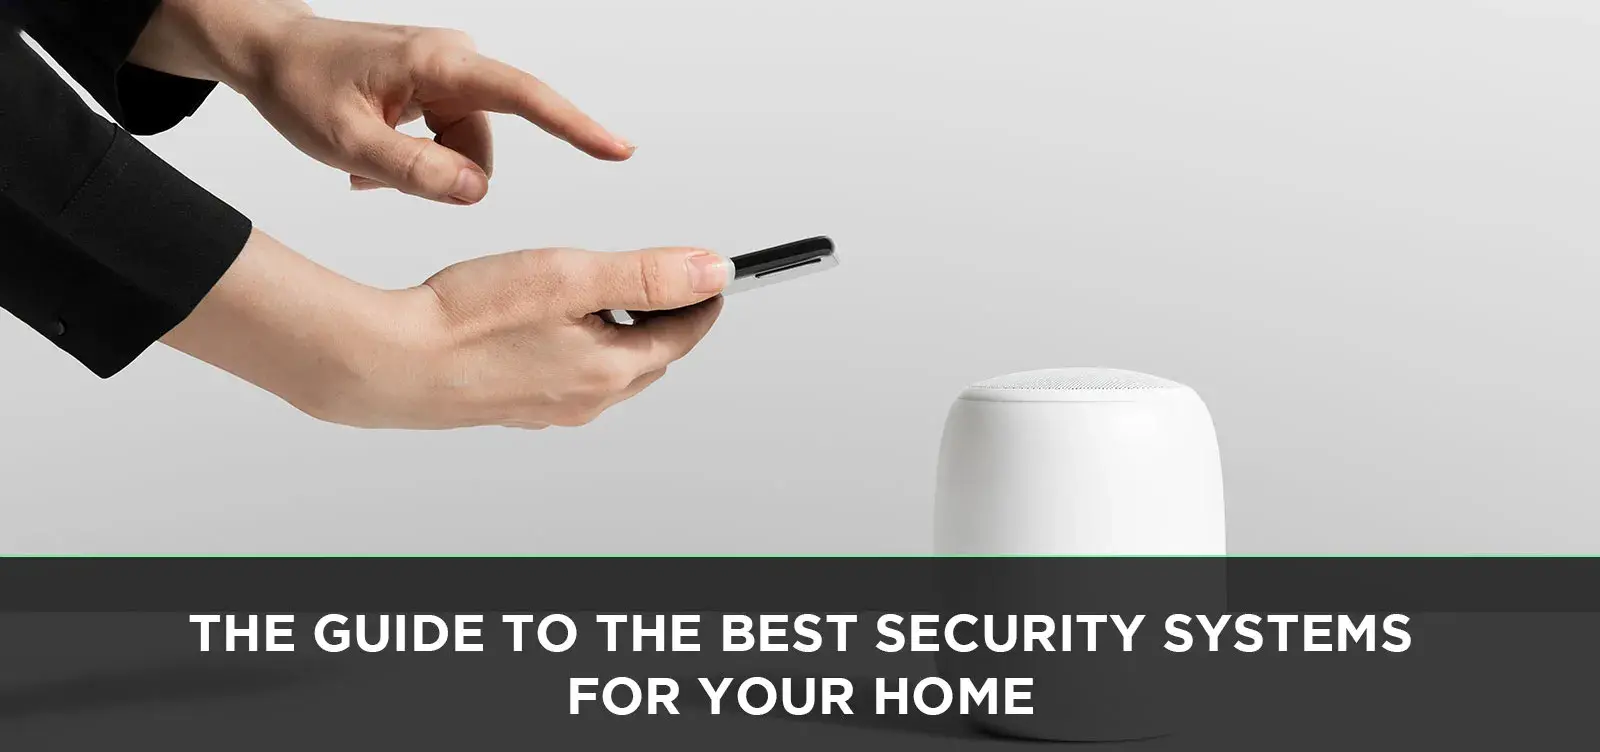 The-Guide-to-the-Best-Security-Systems-for-Your-Home